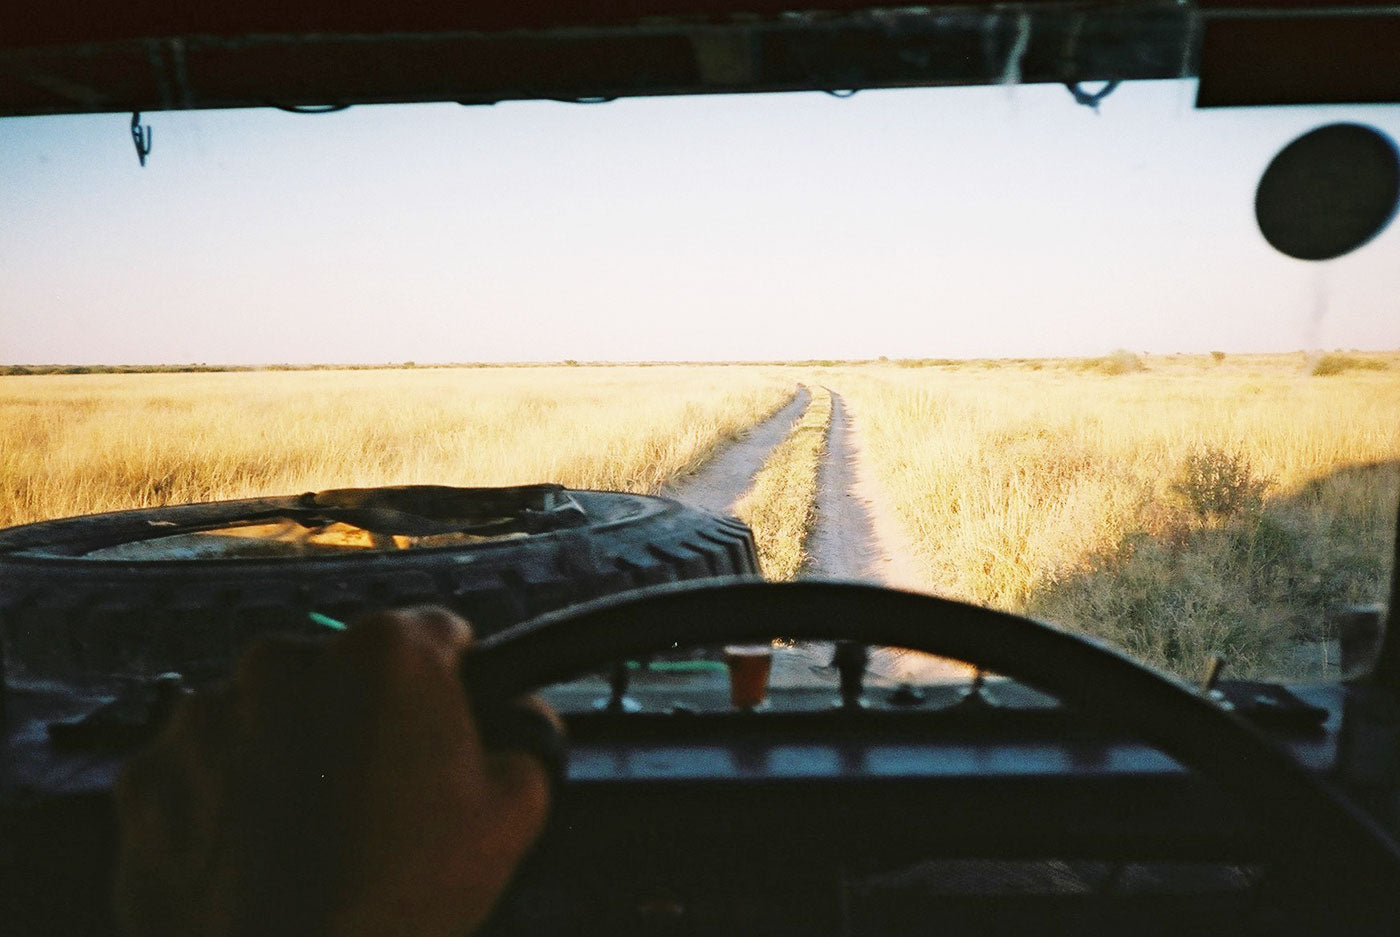 View from the steering wheel outside. Empty rough road in Botswana. (Photo: Lille-Gramberg-Danielsen & Lukas Beuster)